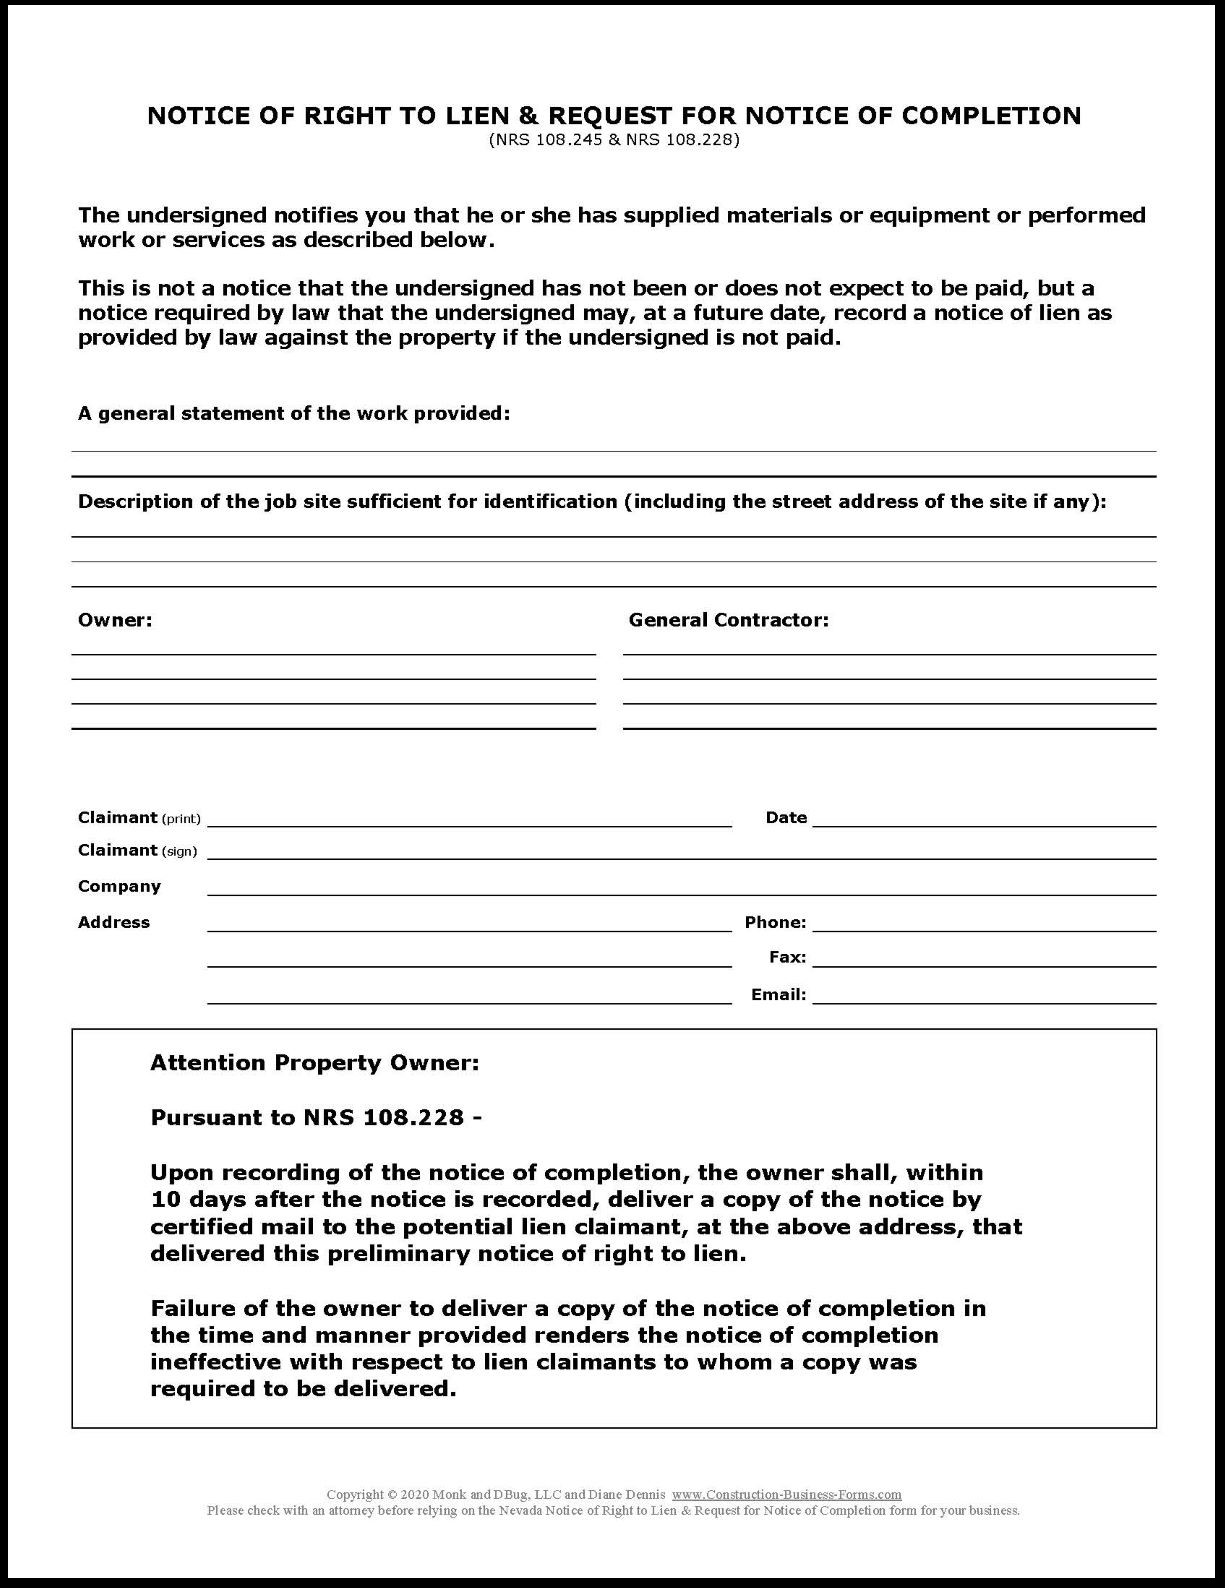 Image of, and link to, Nevada Notice of Right to Lien and Request for Notice of Completion.